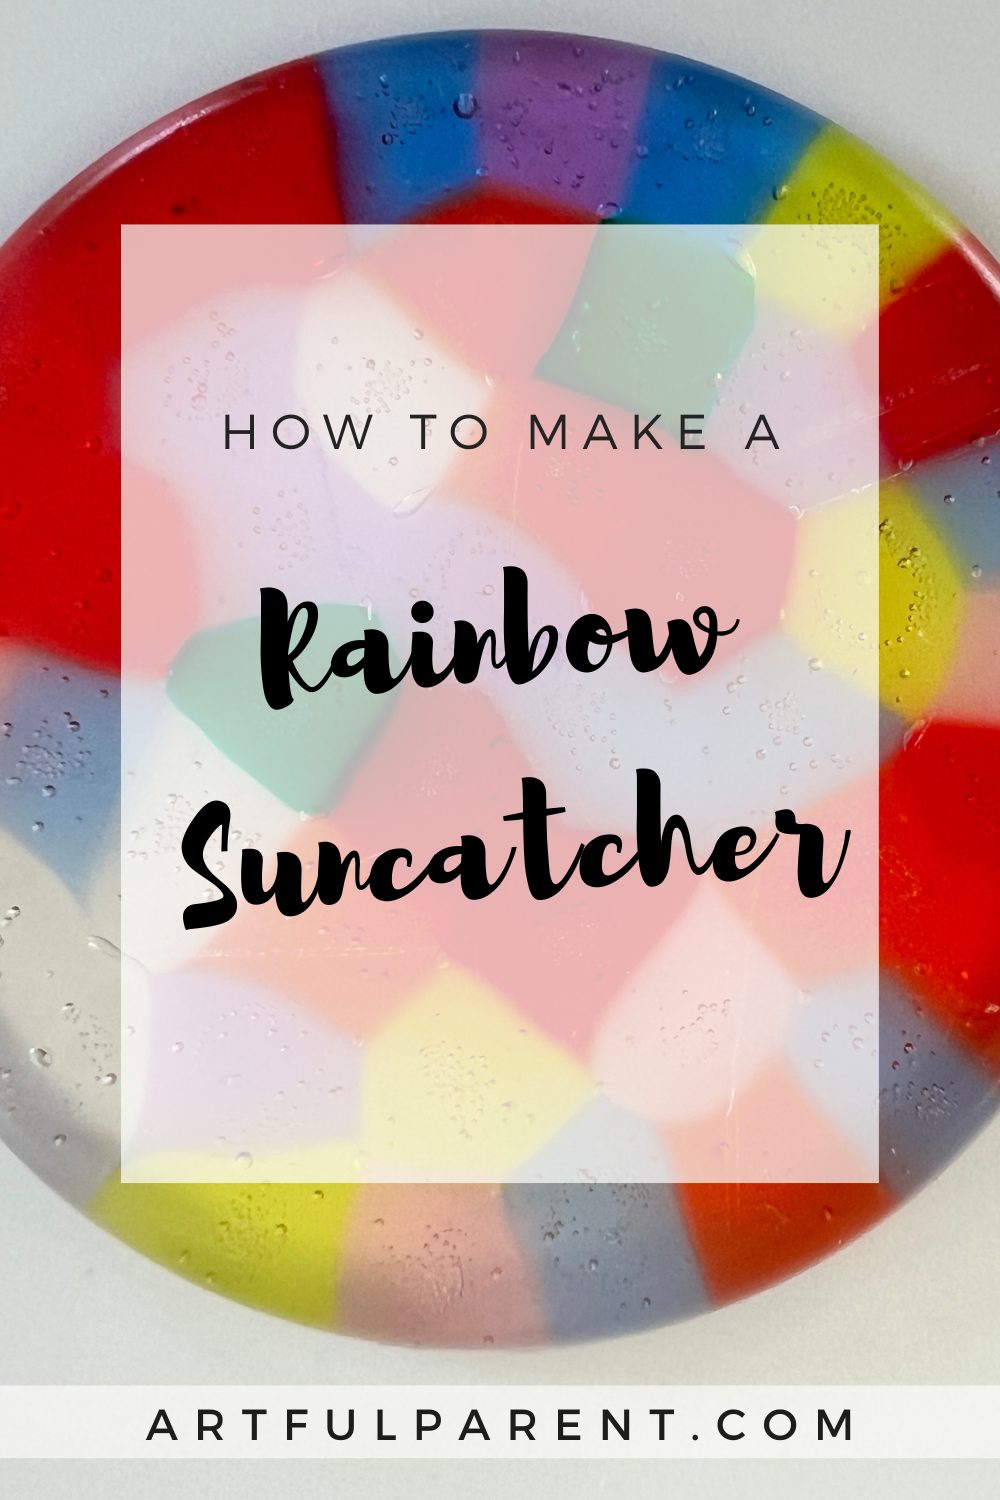 How to Make a Rainbow Suncatcher with Plastic Beads